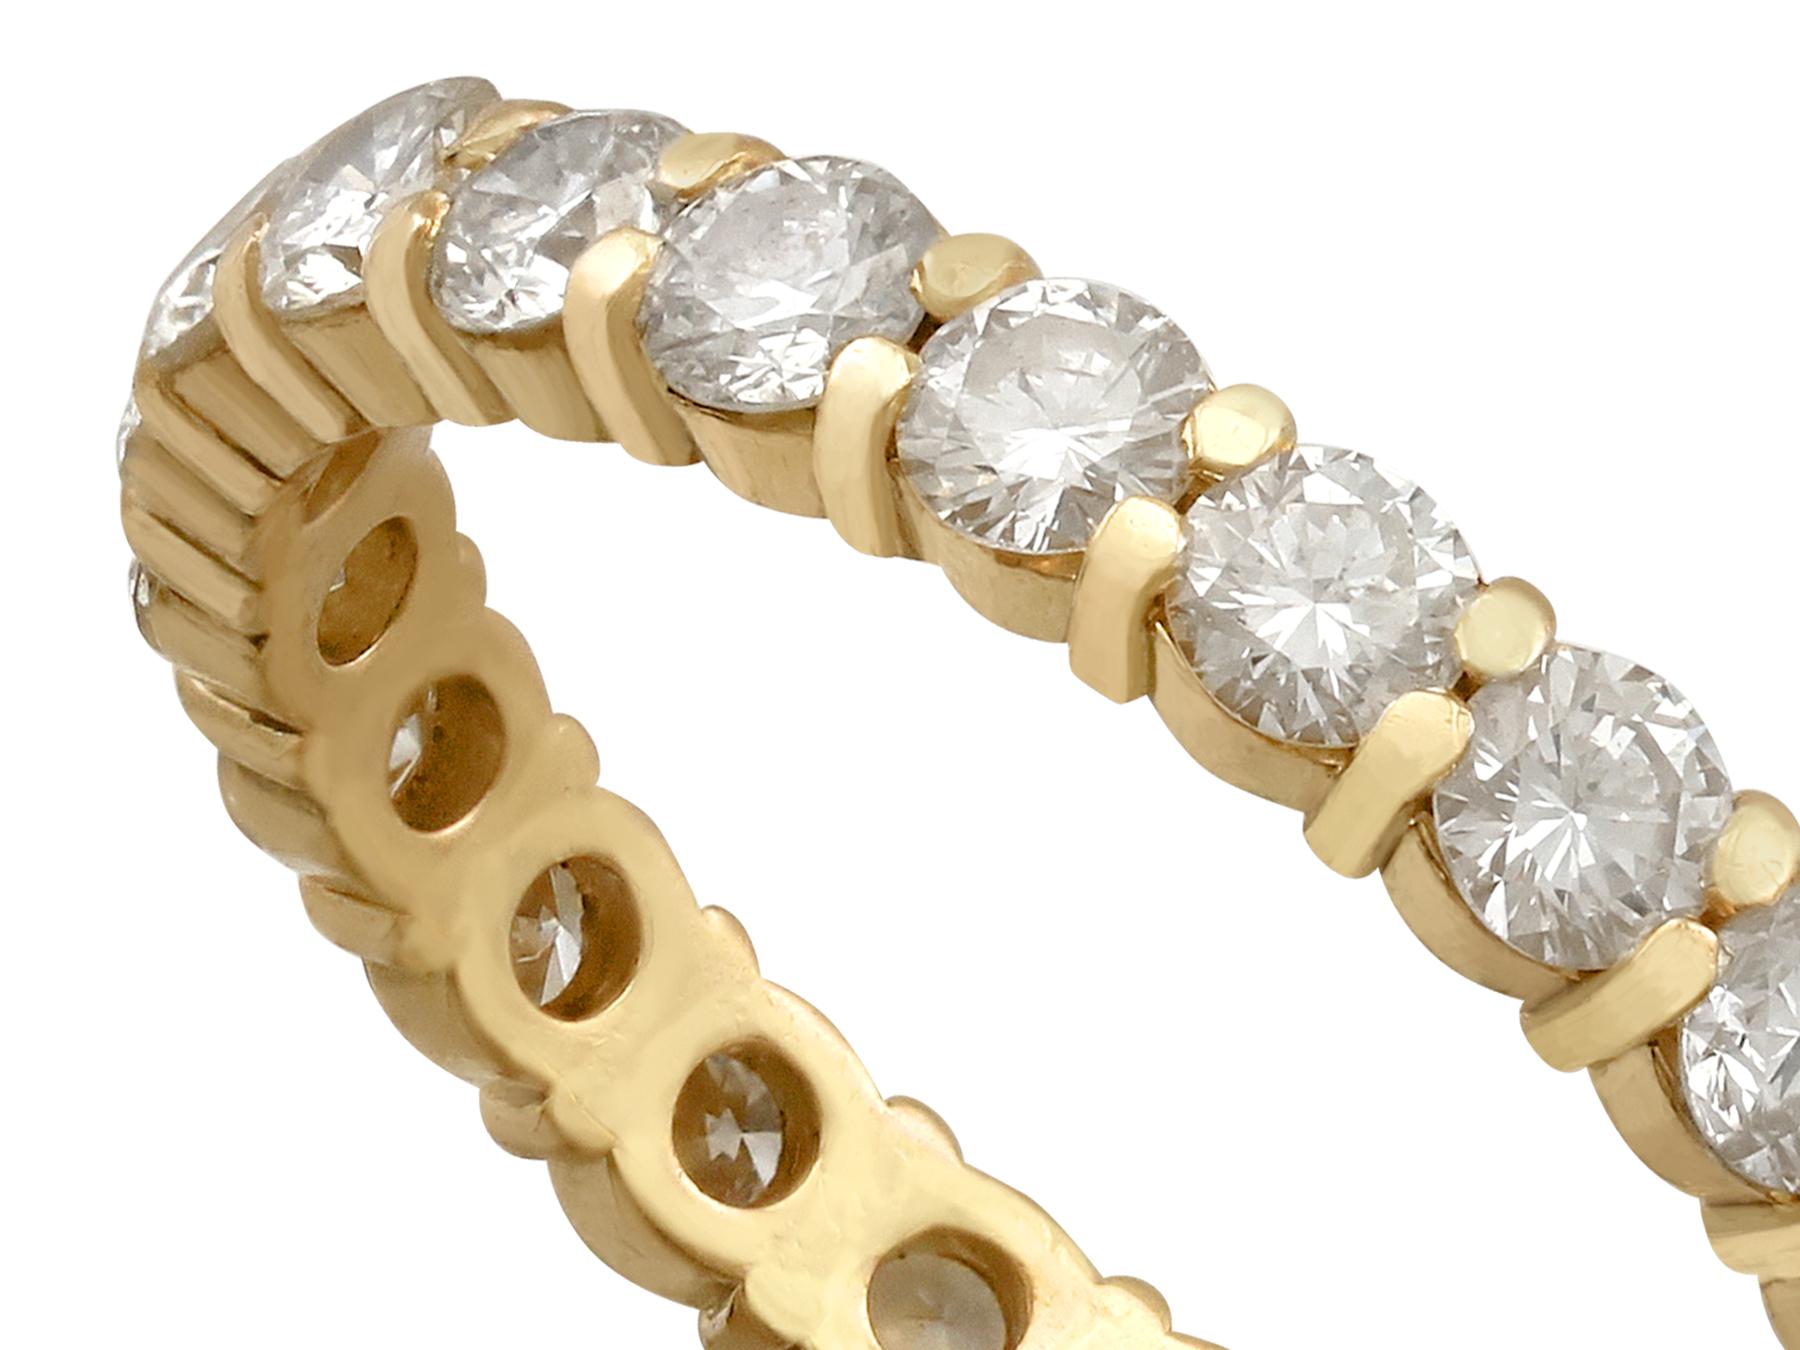 An impressive vintage French 1.32 carat diamond and 18 karat yellow gold full eternity ring; part of our diverse antique jewelry and estate jewelry collections.

This fine and impressive vintage eternity ring has been crafted in 18k yellow